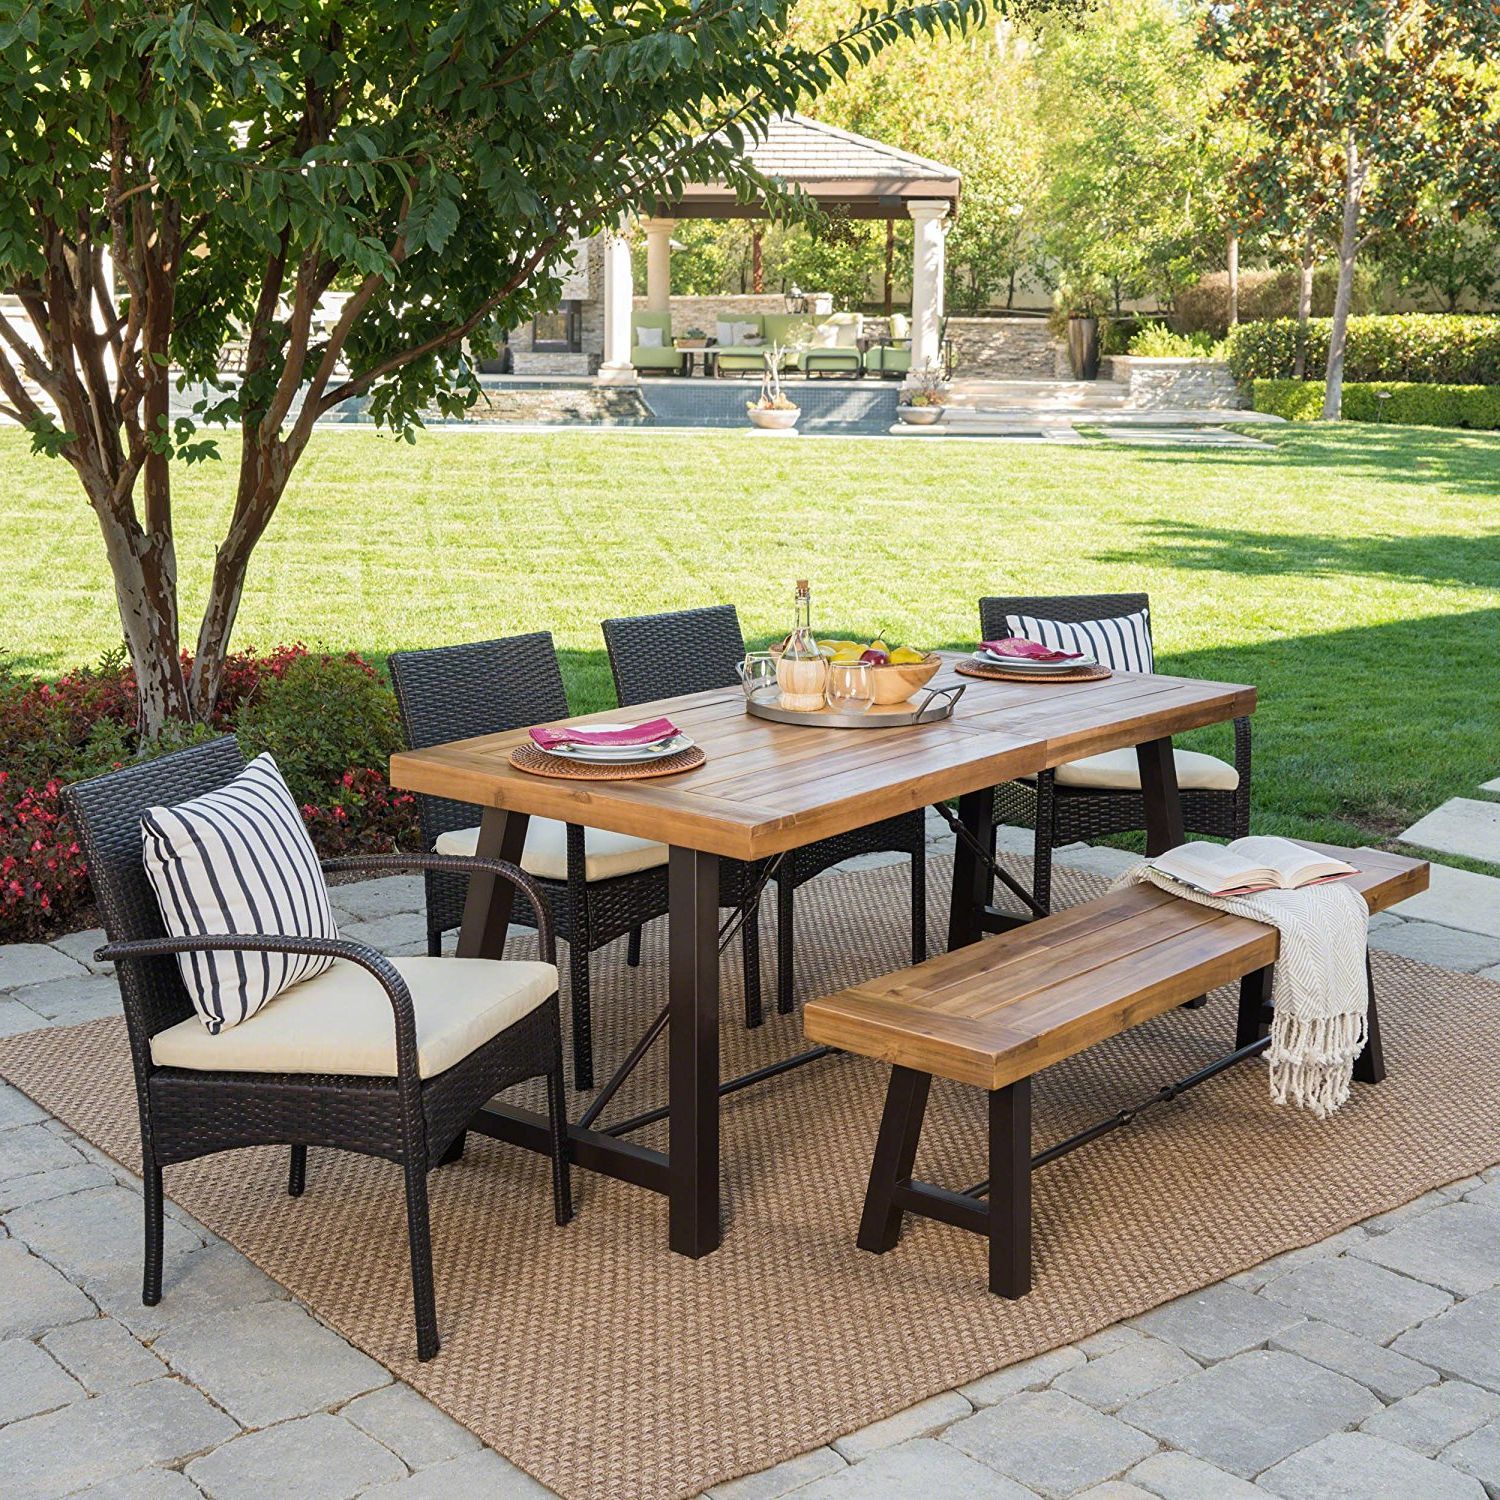 Luxury Furniture Review: Belham Outdoor 6 Piece Teak Finished Acacia Pertaining To Recent Teak Wicker Outdoor Dining Sets (View 5 of 15)